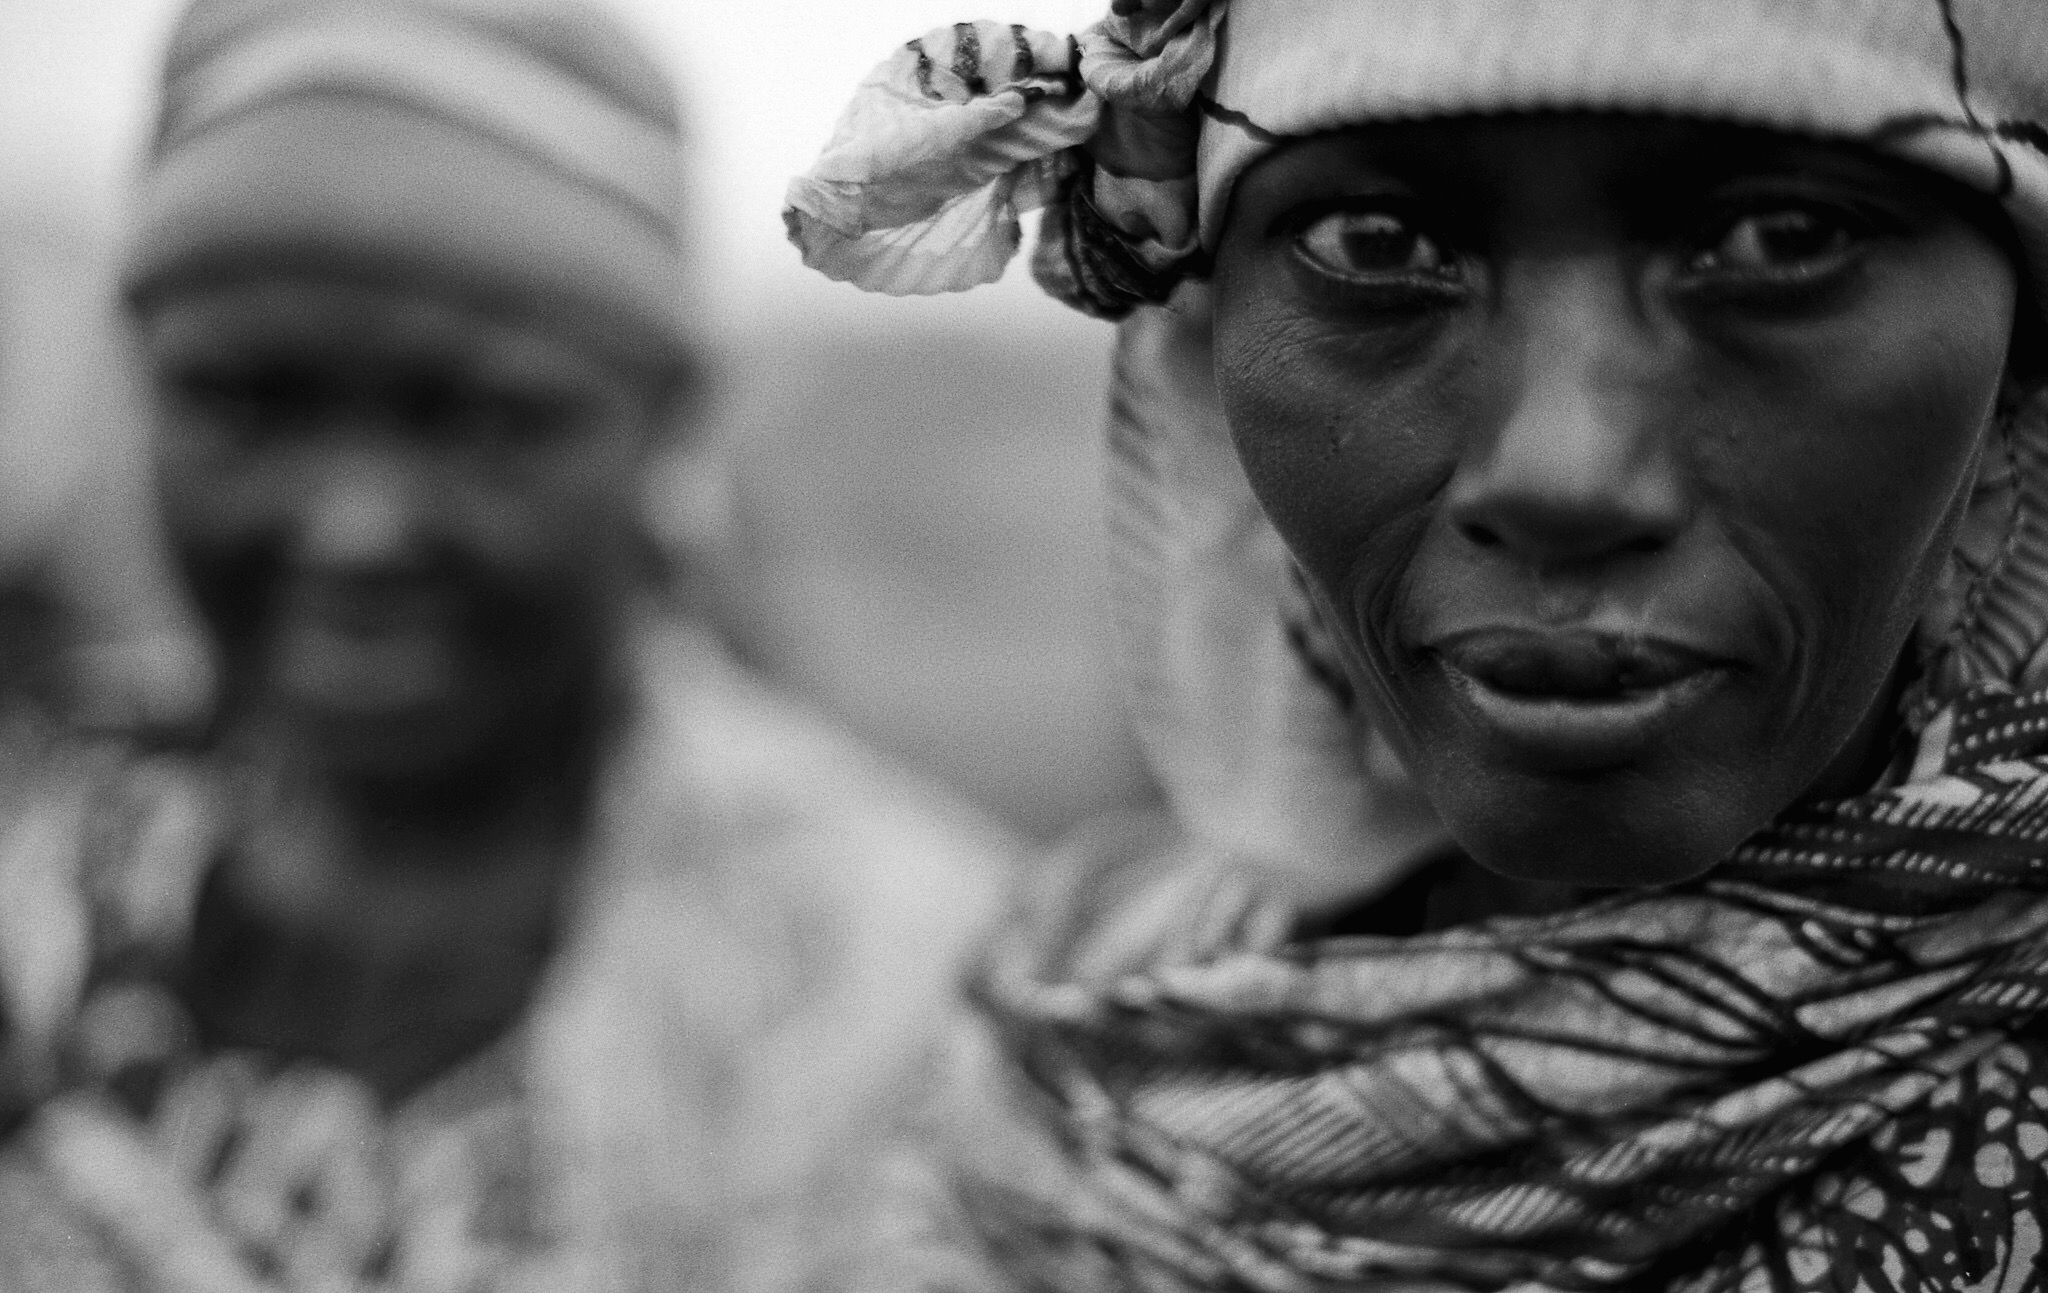 Displaced women in Goma, DRC.